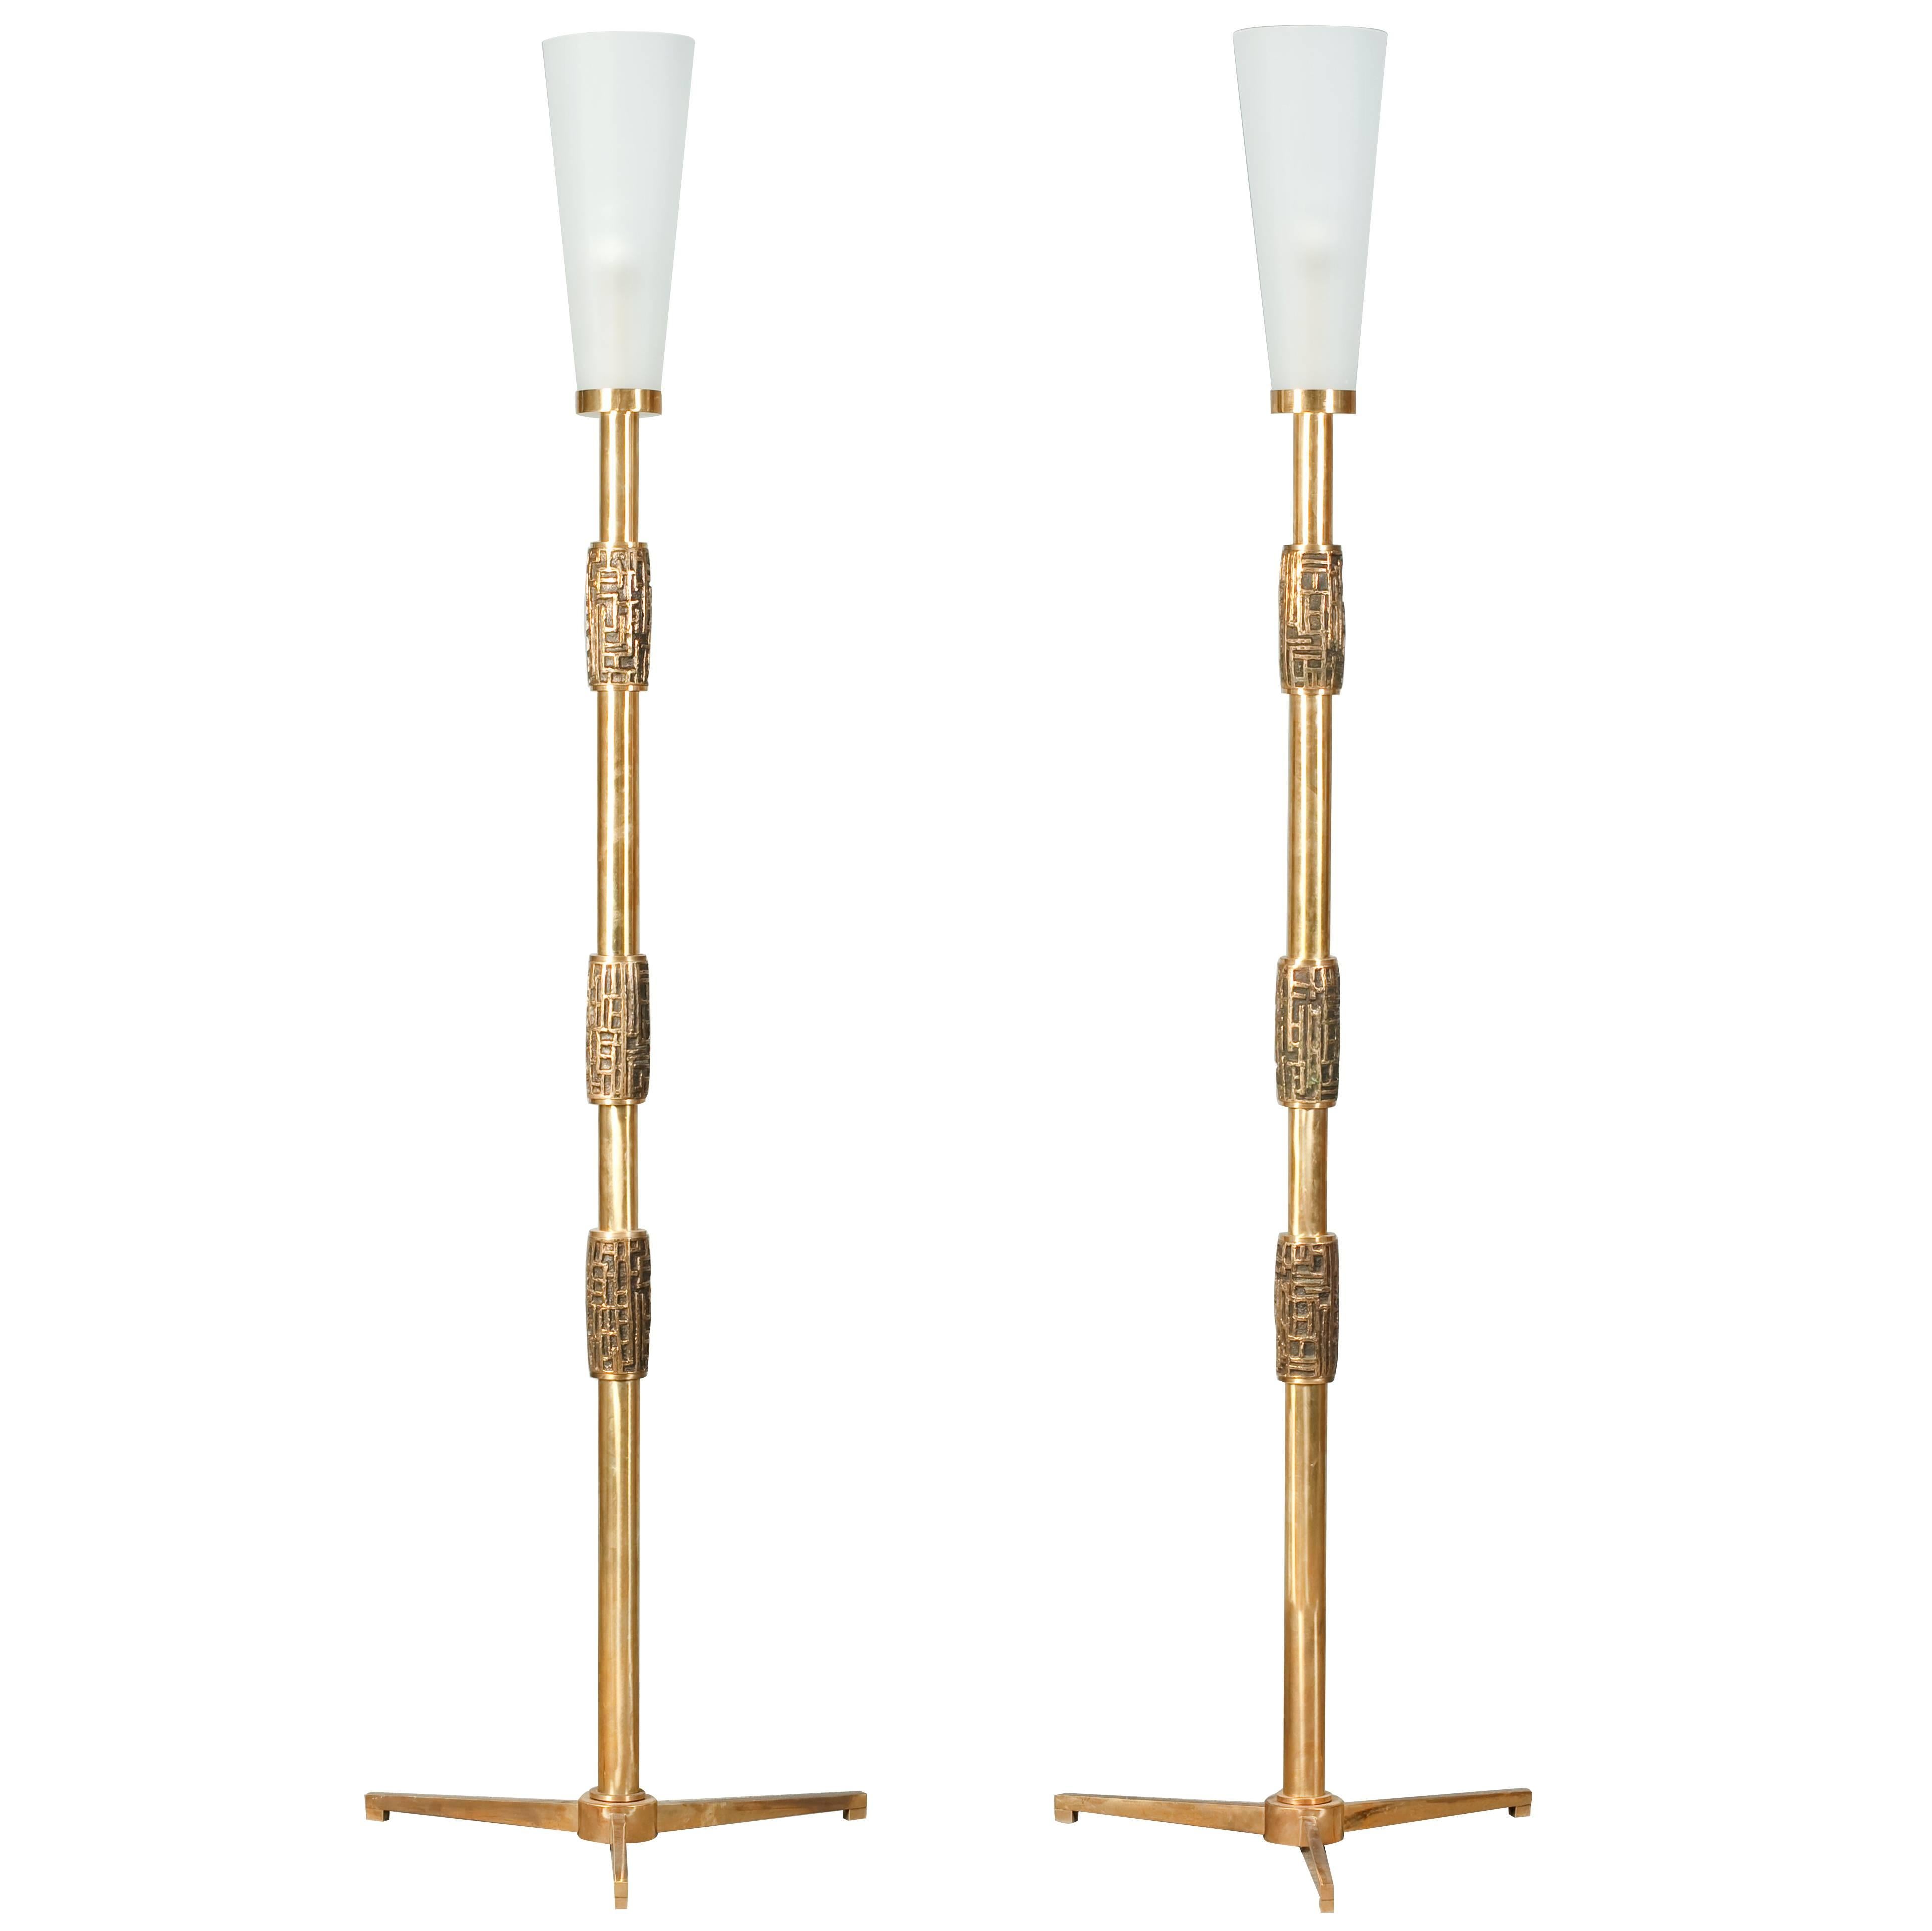 Rare Pair of Bronze Floor Lamps by Luciano Frigerio